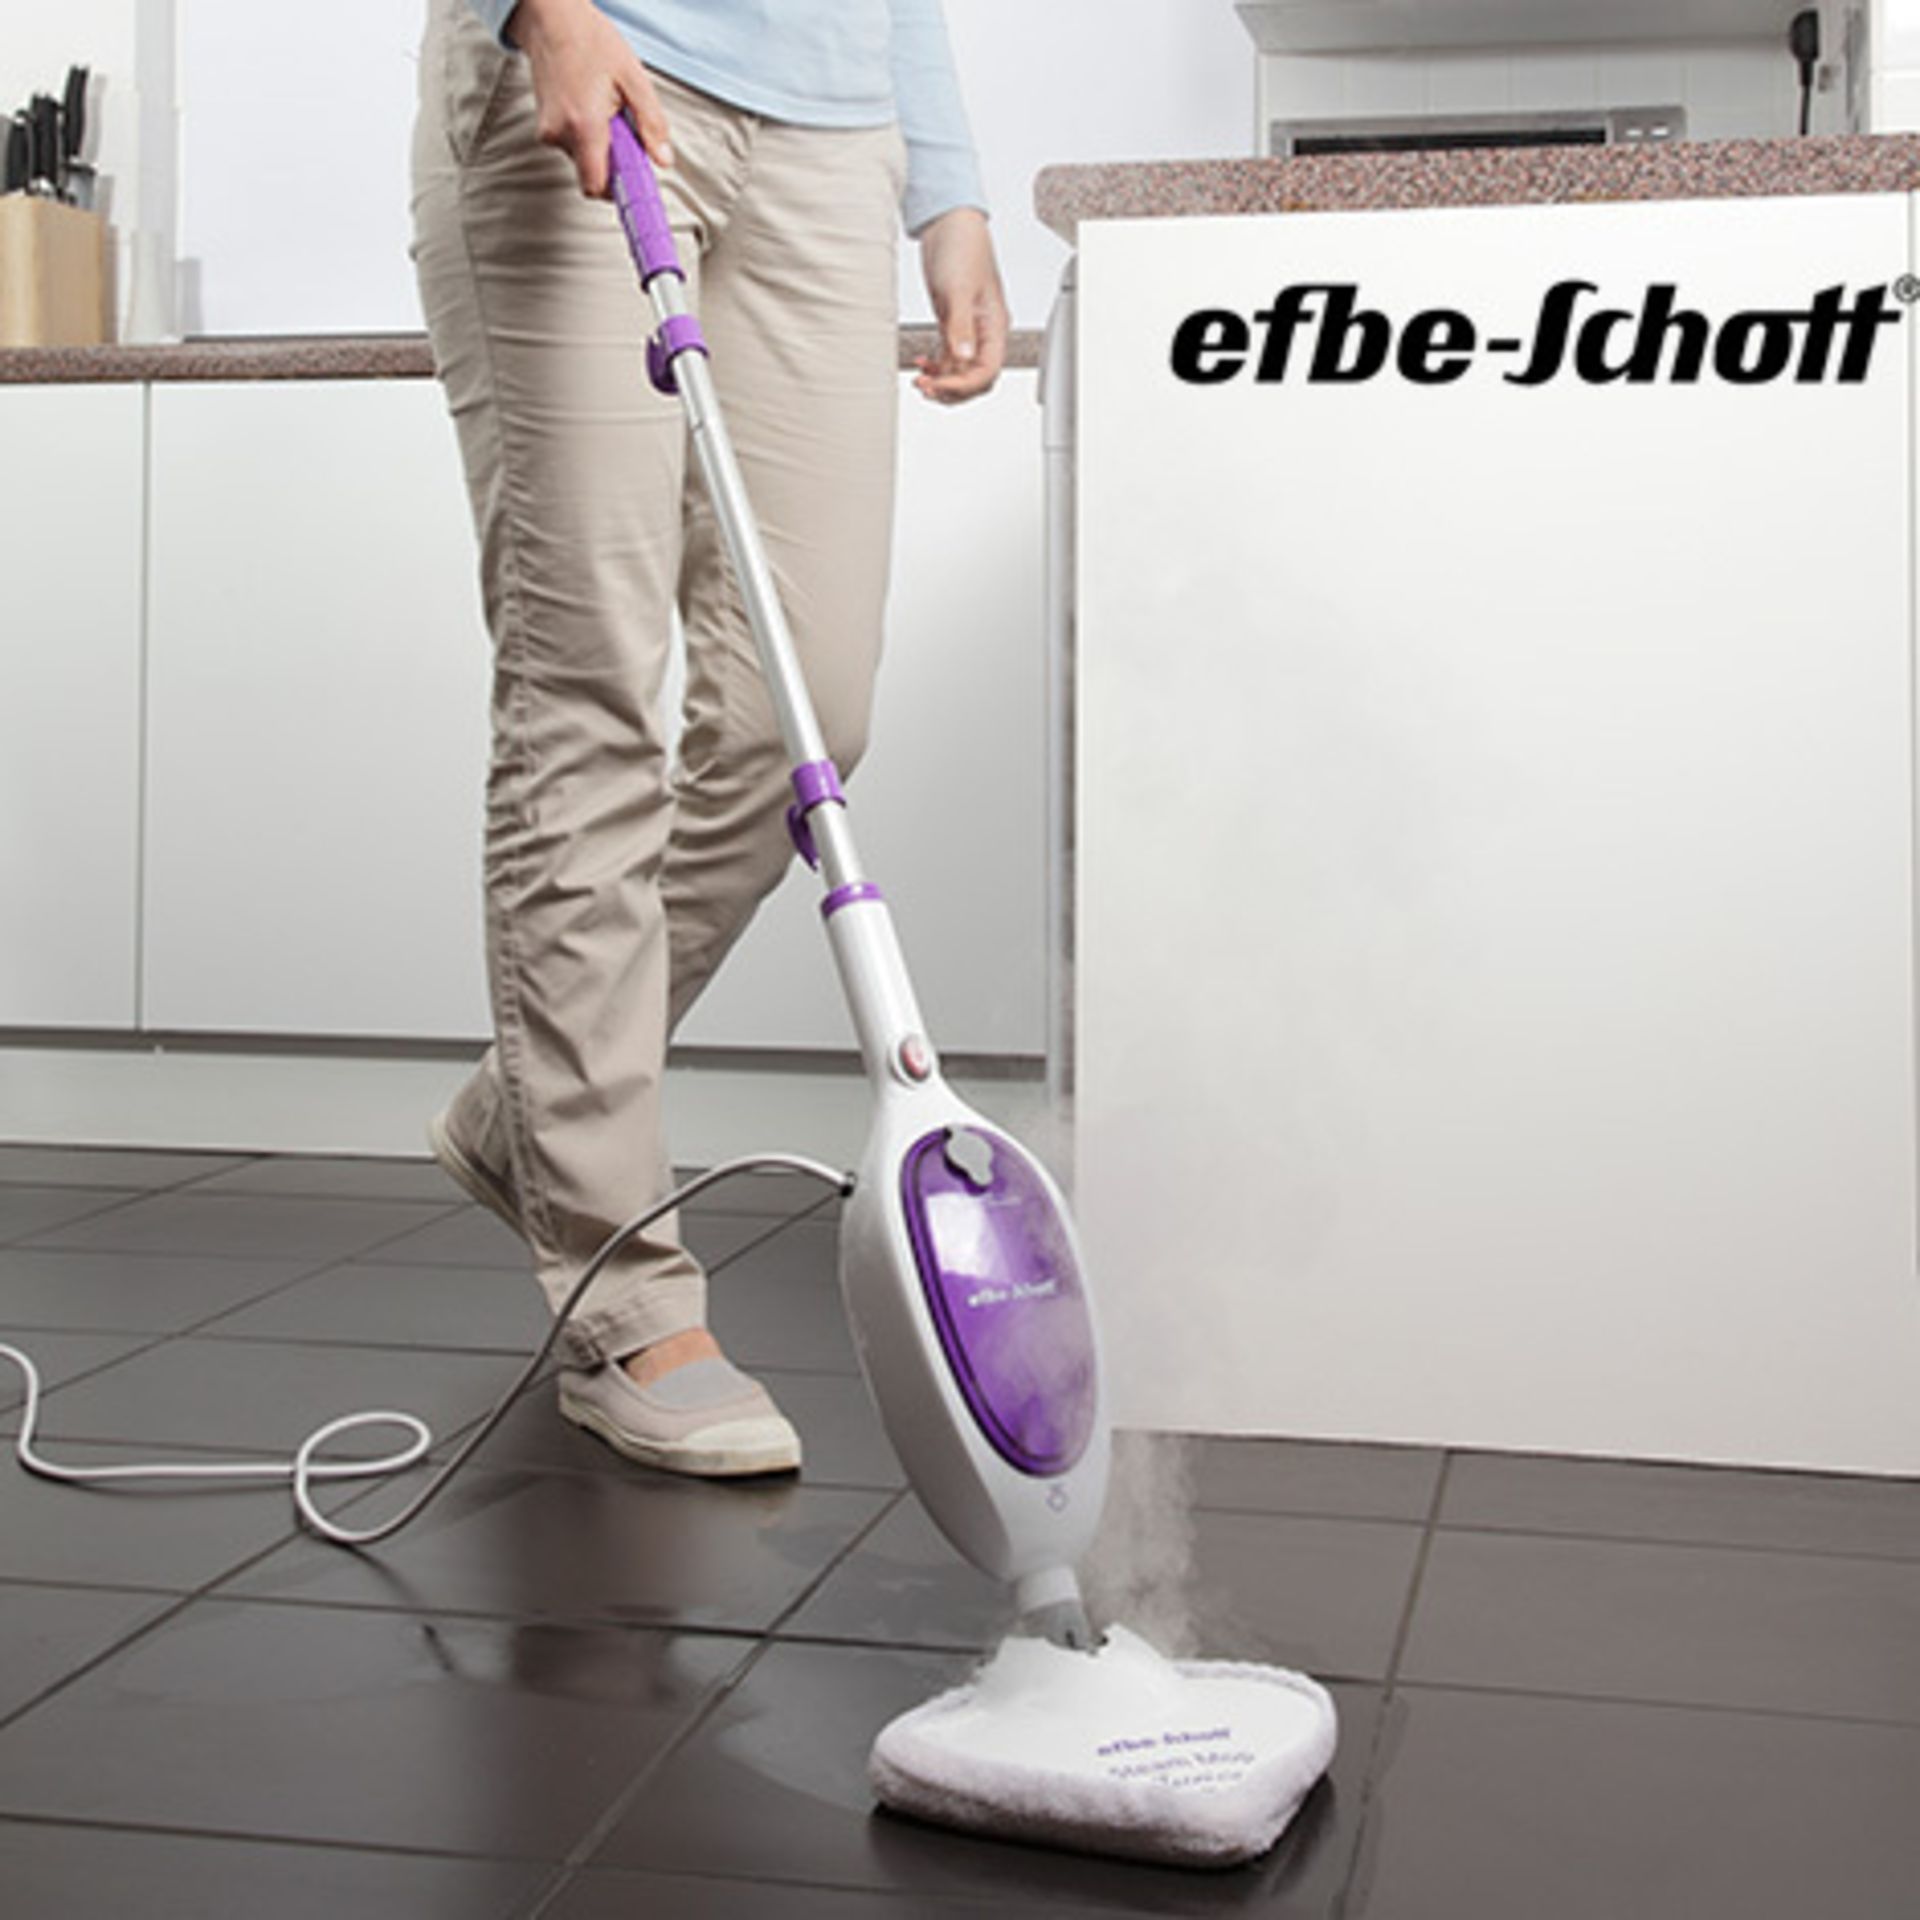 V *TRADE QTY* Brand New Efbe-Schott Steam Mop (New And Boxed) Colours And Model May Vary RRP59.99